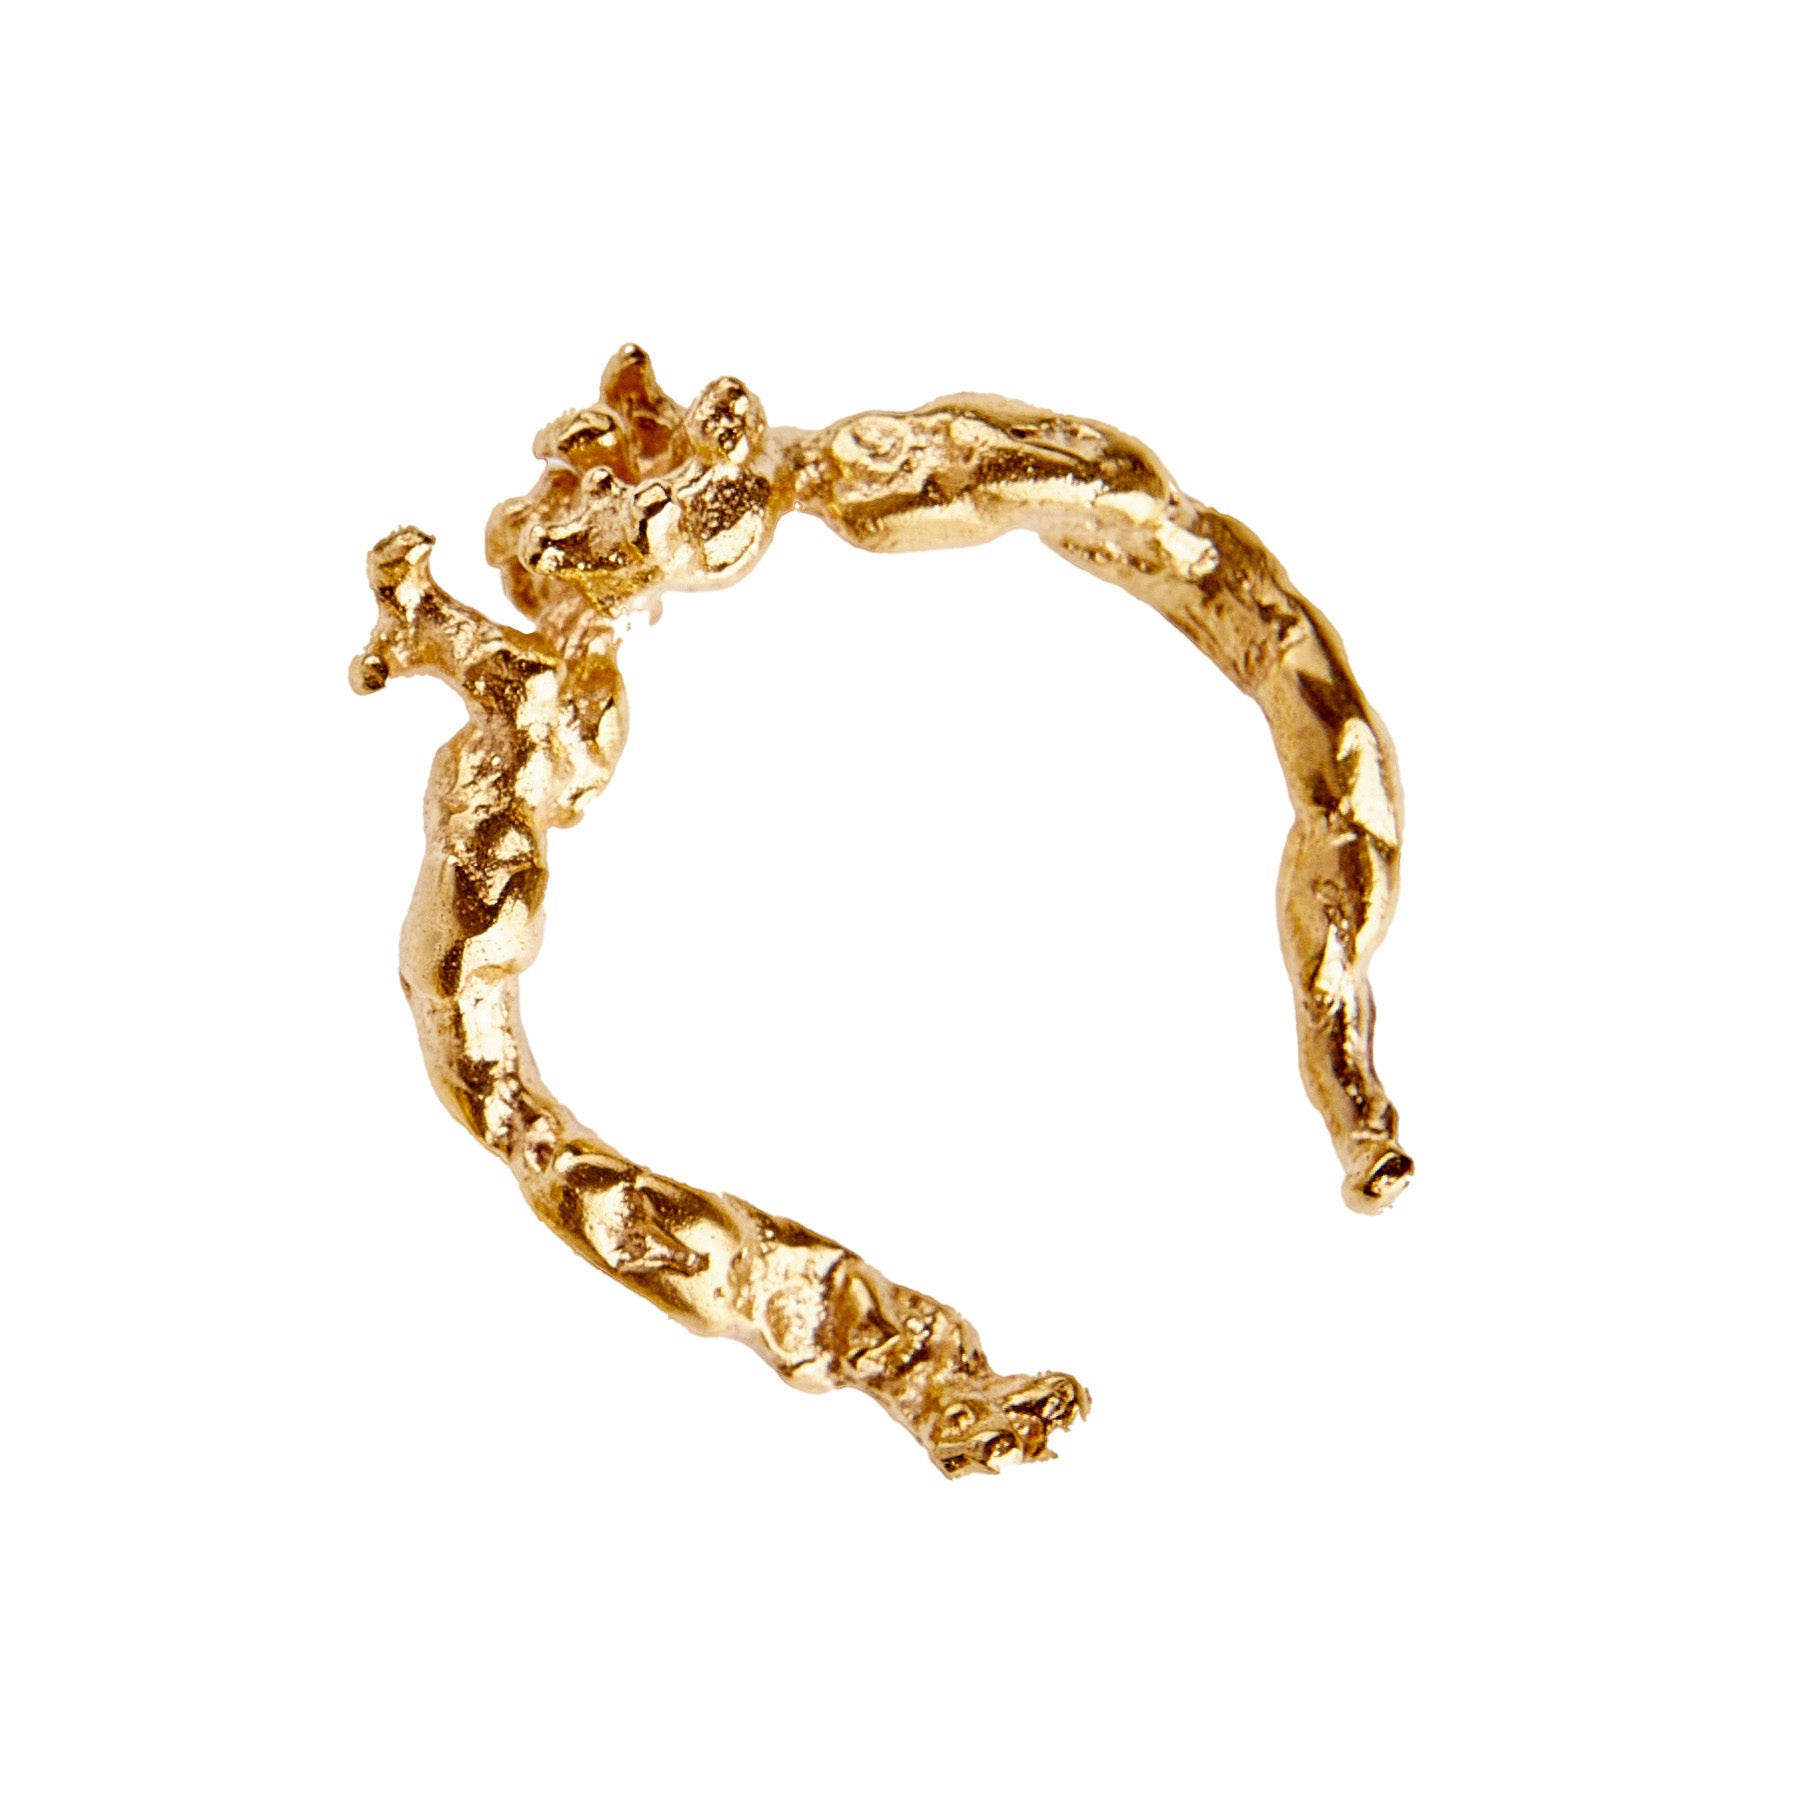 Corallia Psammos Ring - Gold Plated Brass